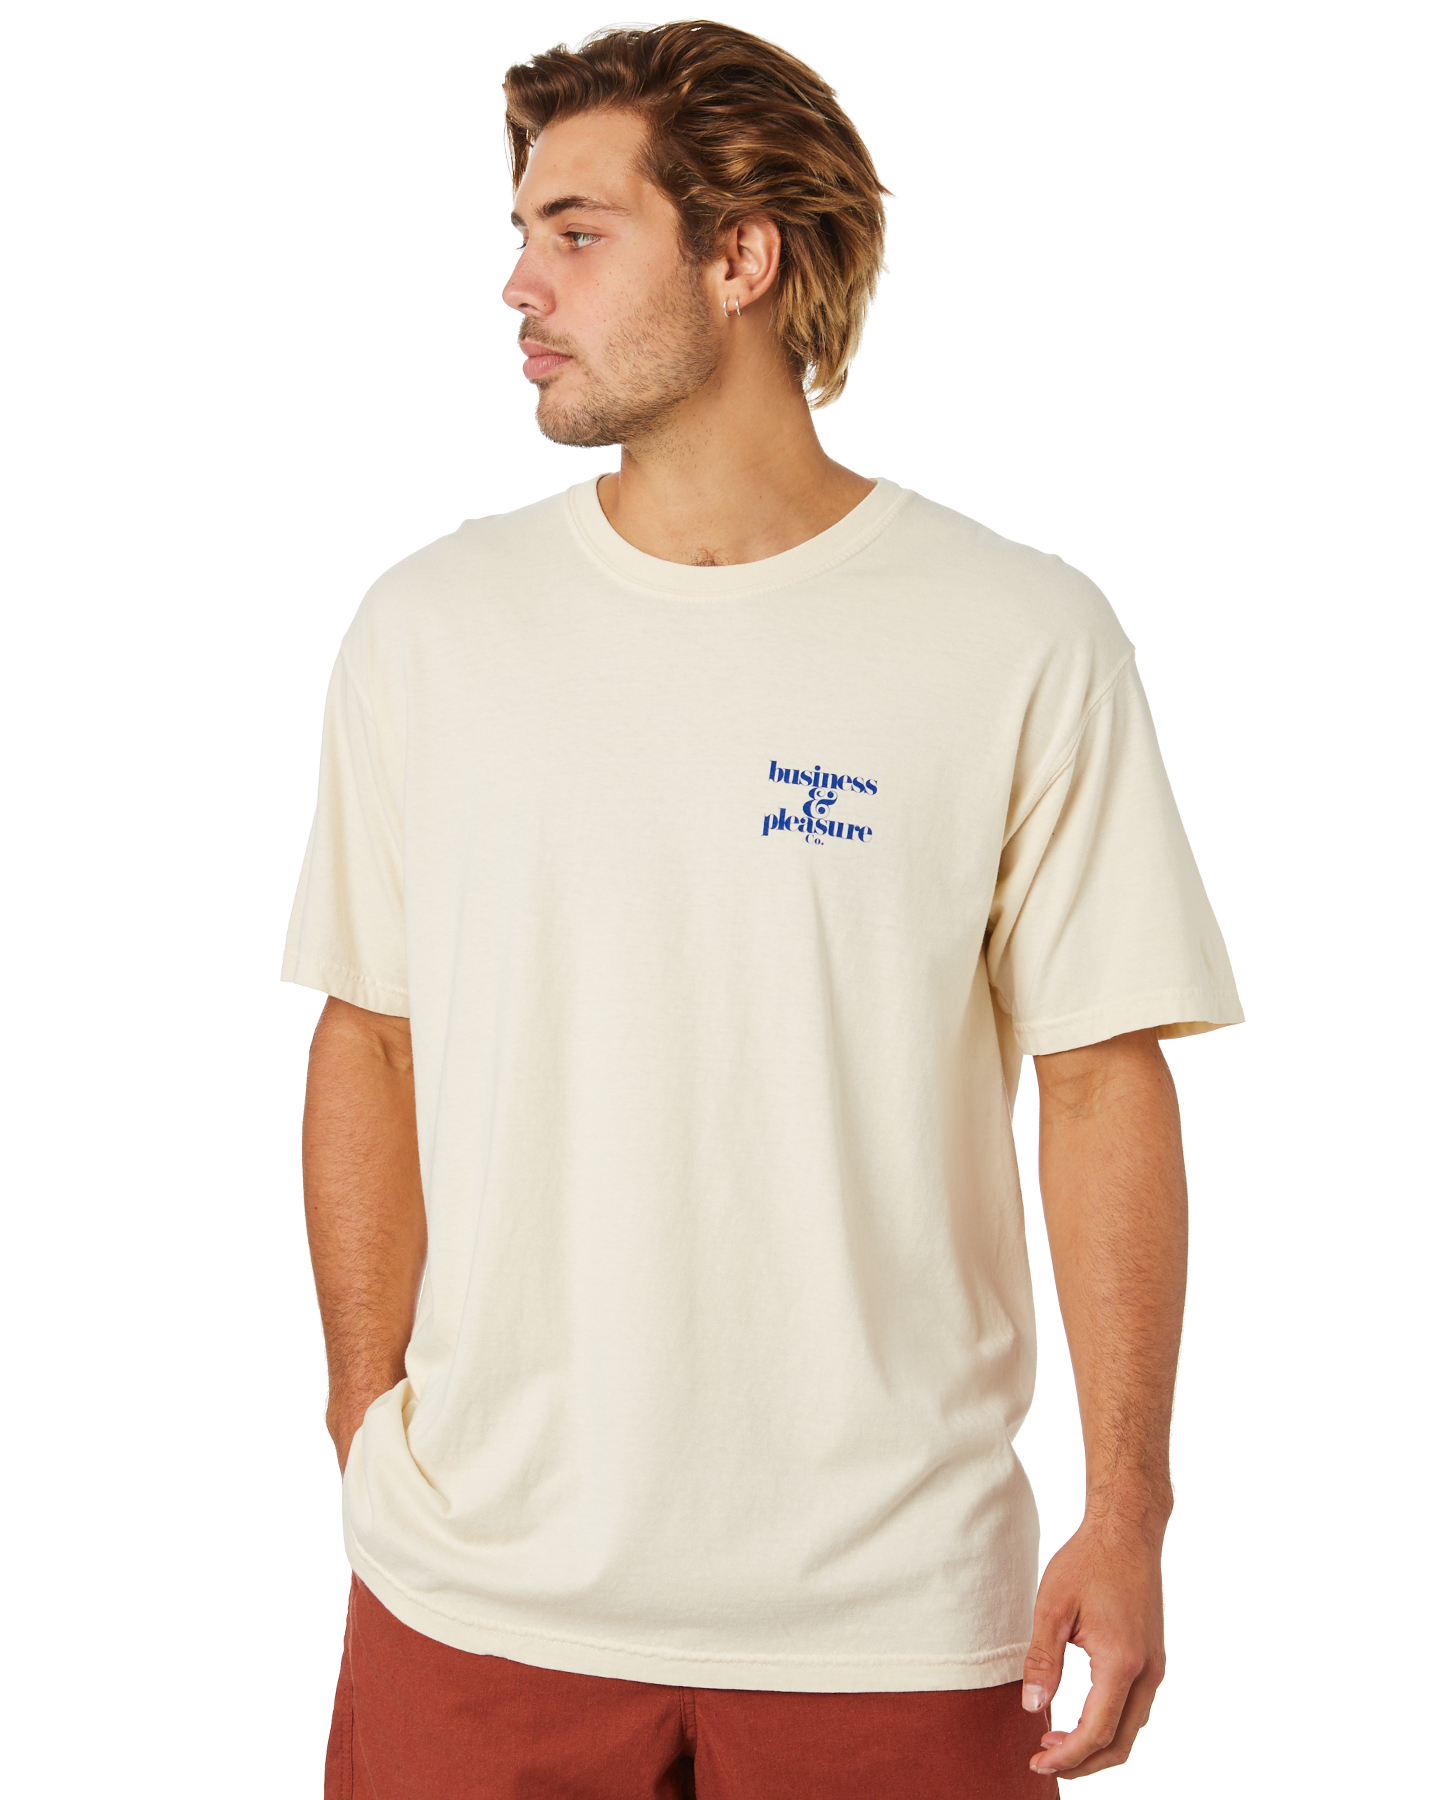 Business And Pleasure Co B&Pco Mens Tee - Antique White | SurfStitch